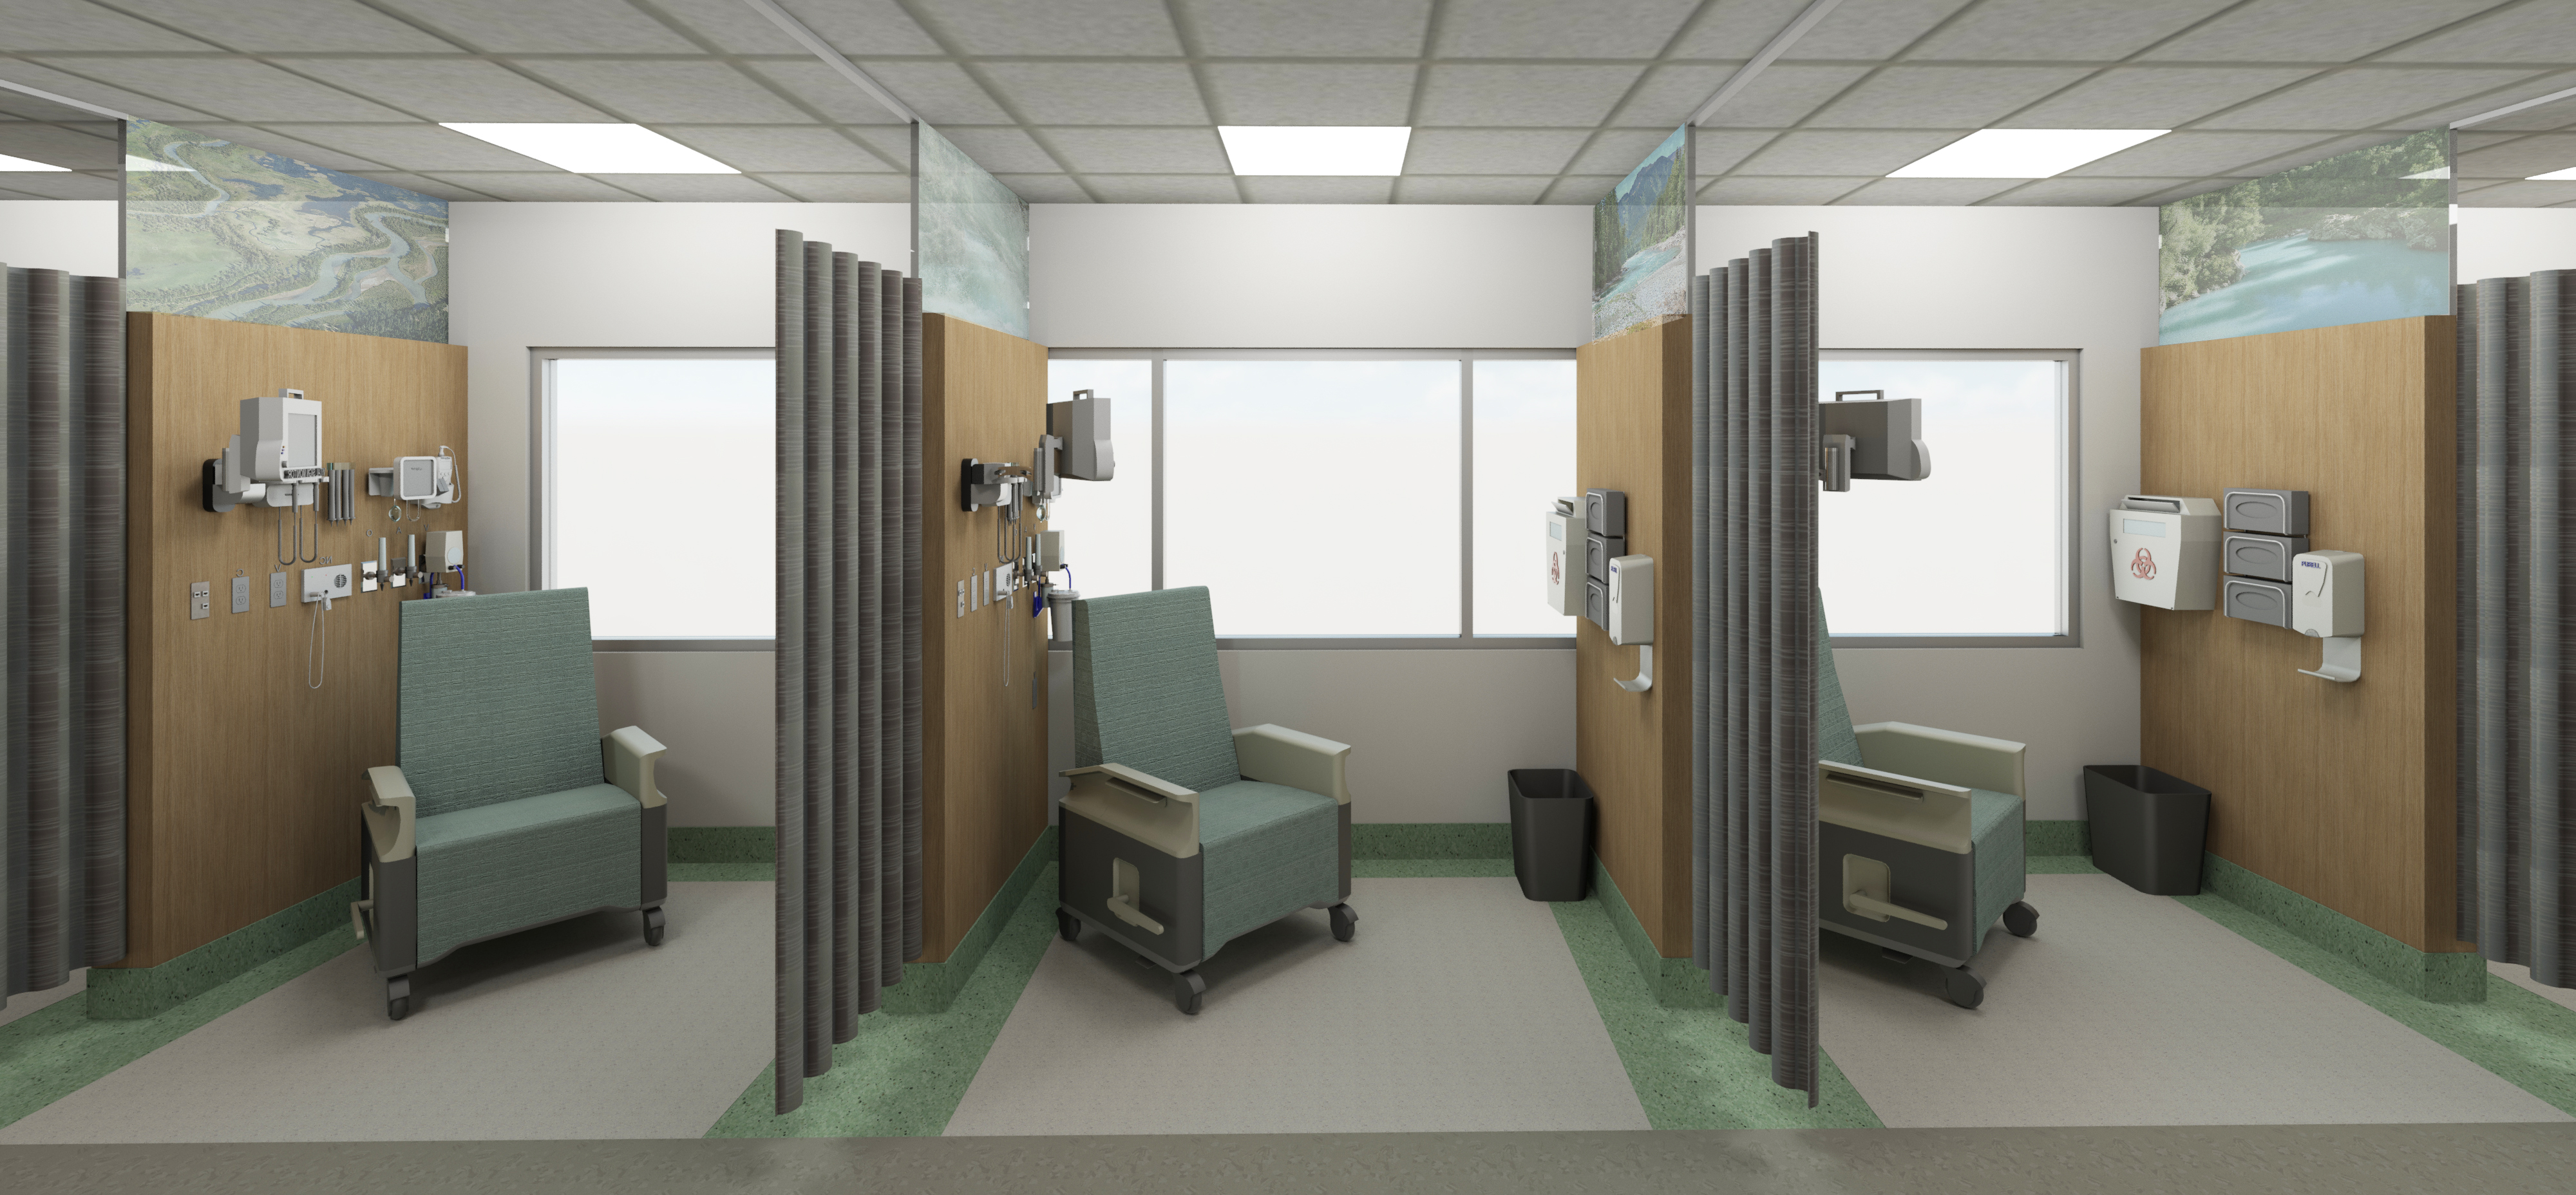 Concept rendering of single-patient treatment spaces in new emergency department. Designs may be subject to change. 